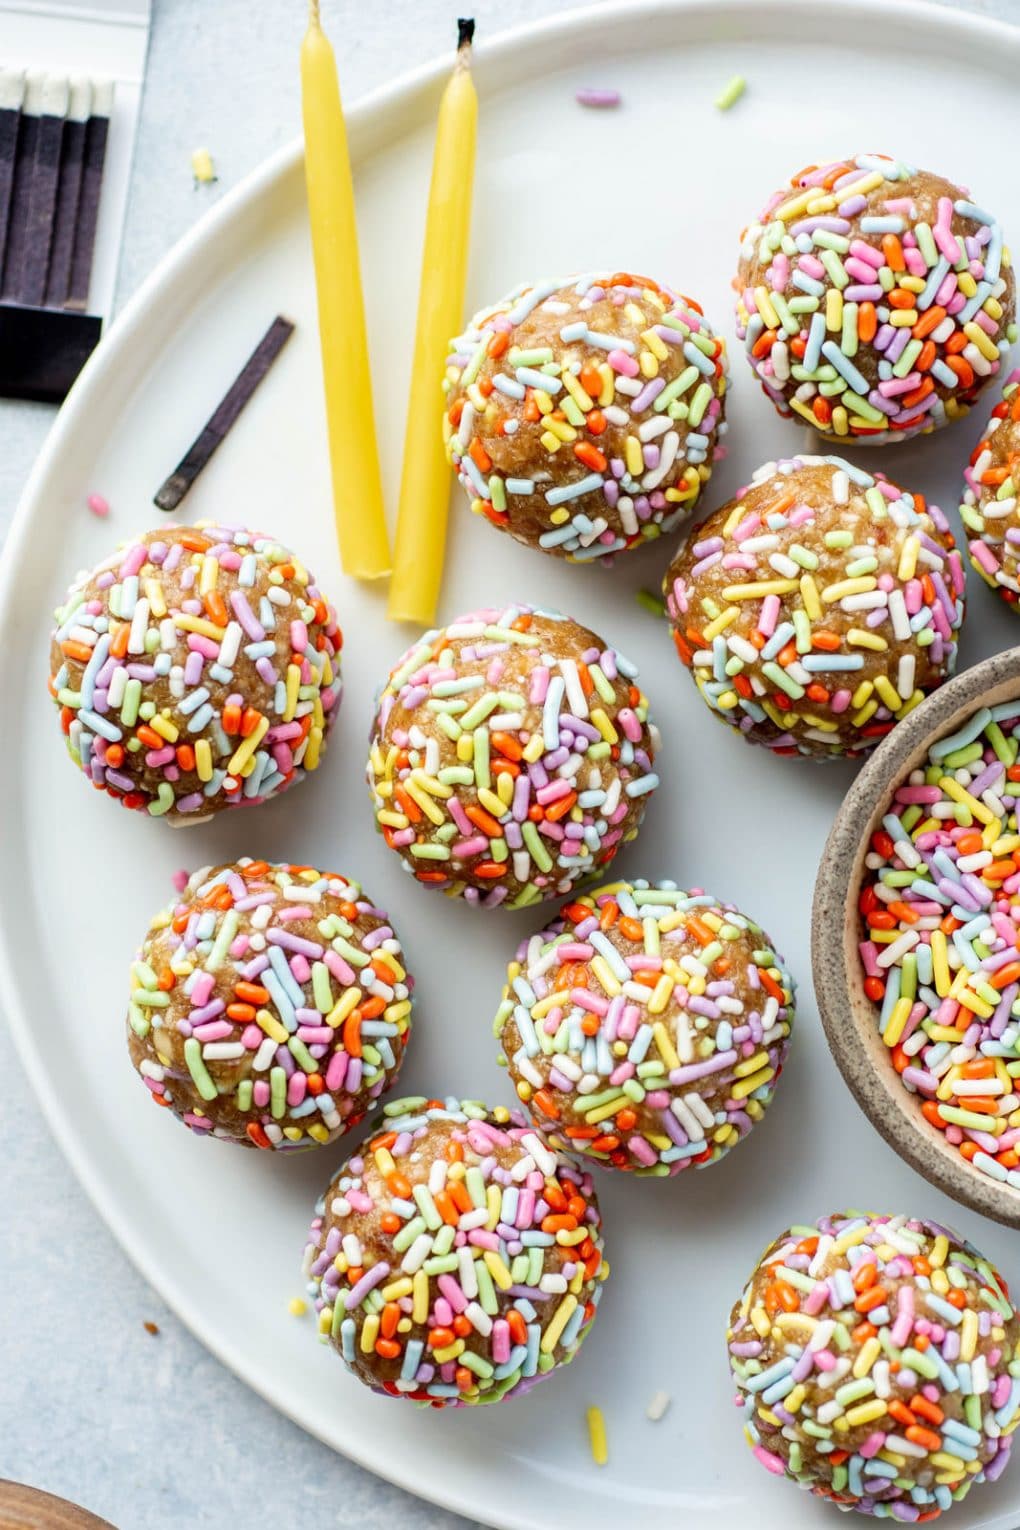 Overhead shot of energy bites coated in rainbow sprinkles on a white plate and white background, next to some beeswax birthday candles and scattered sprinkles.